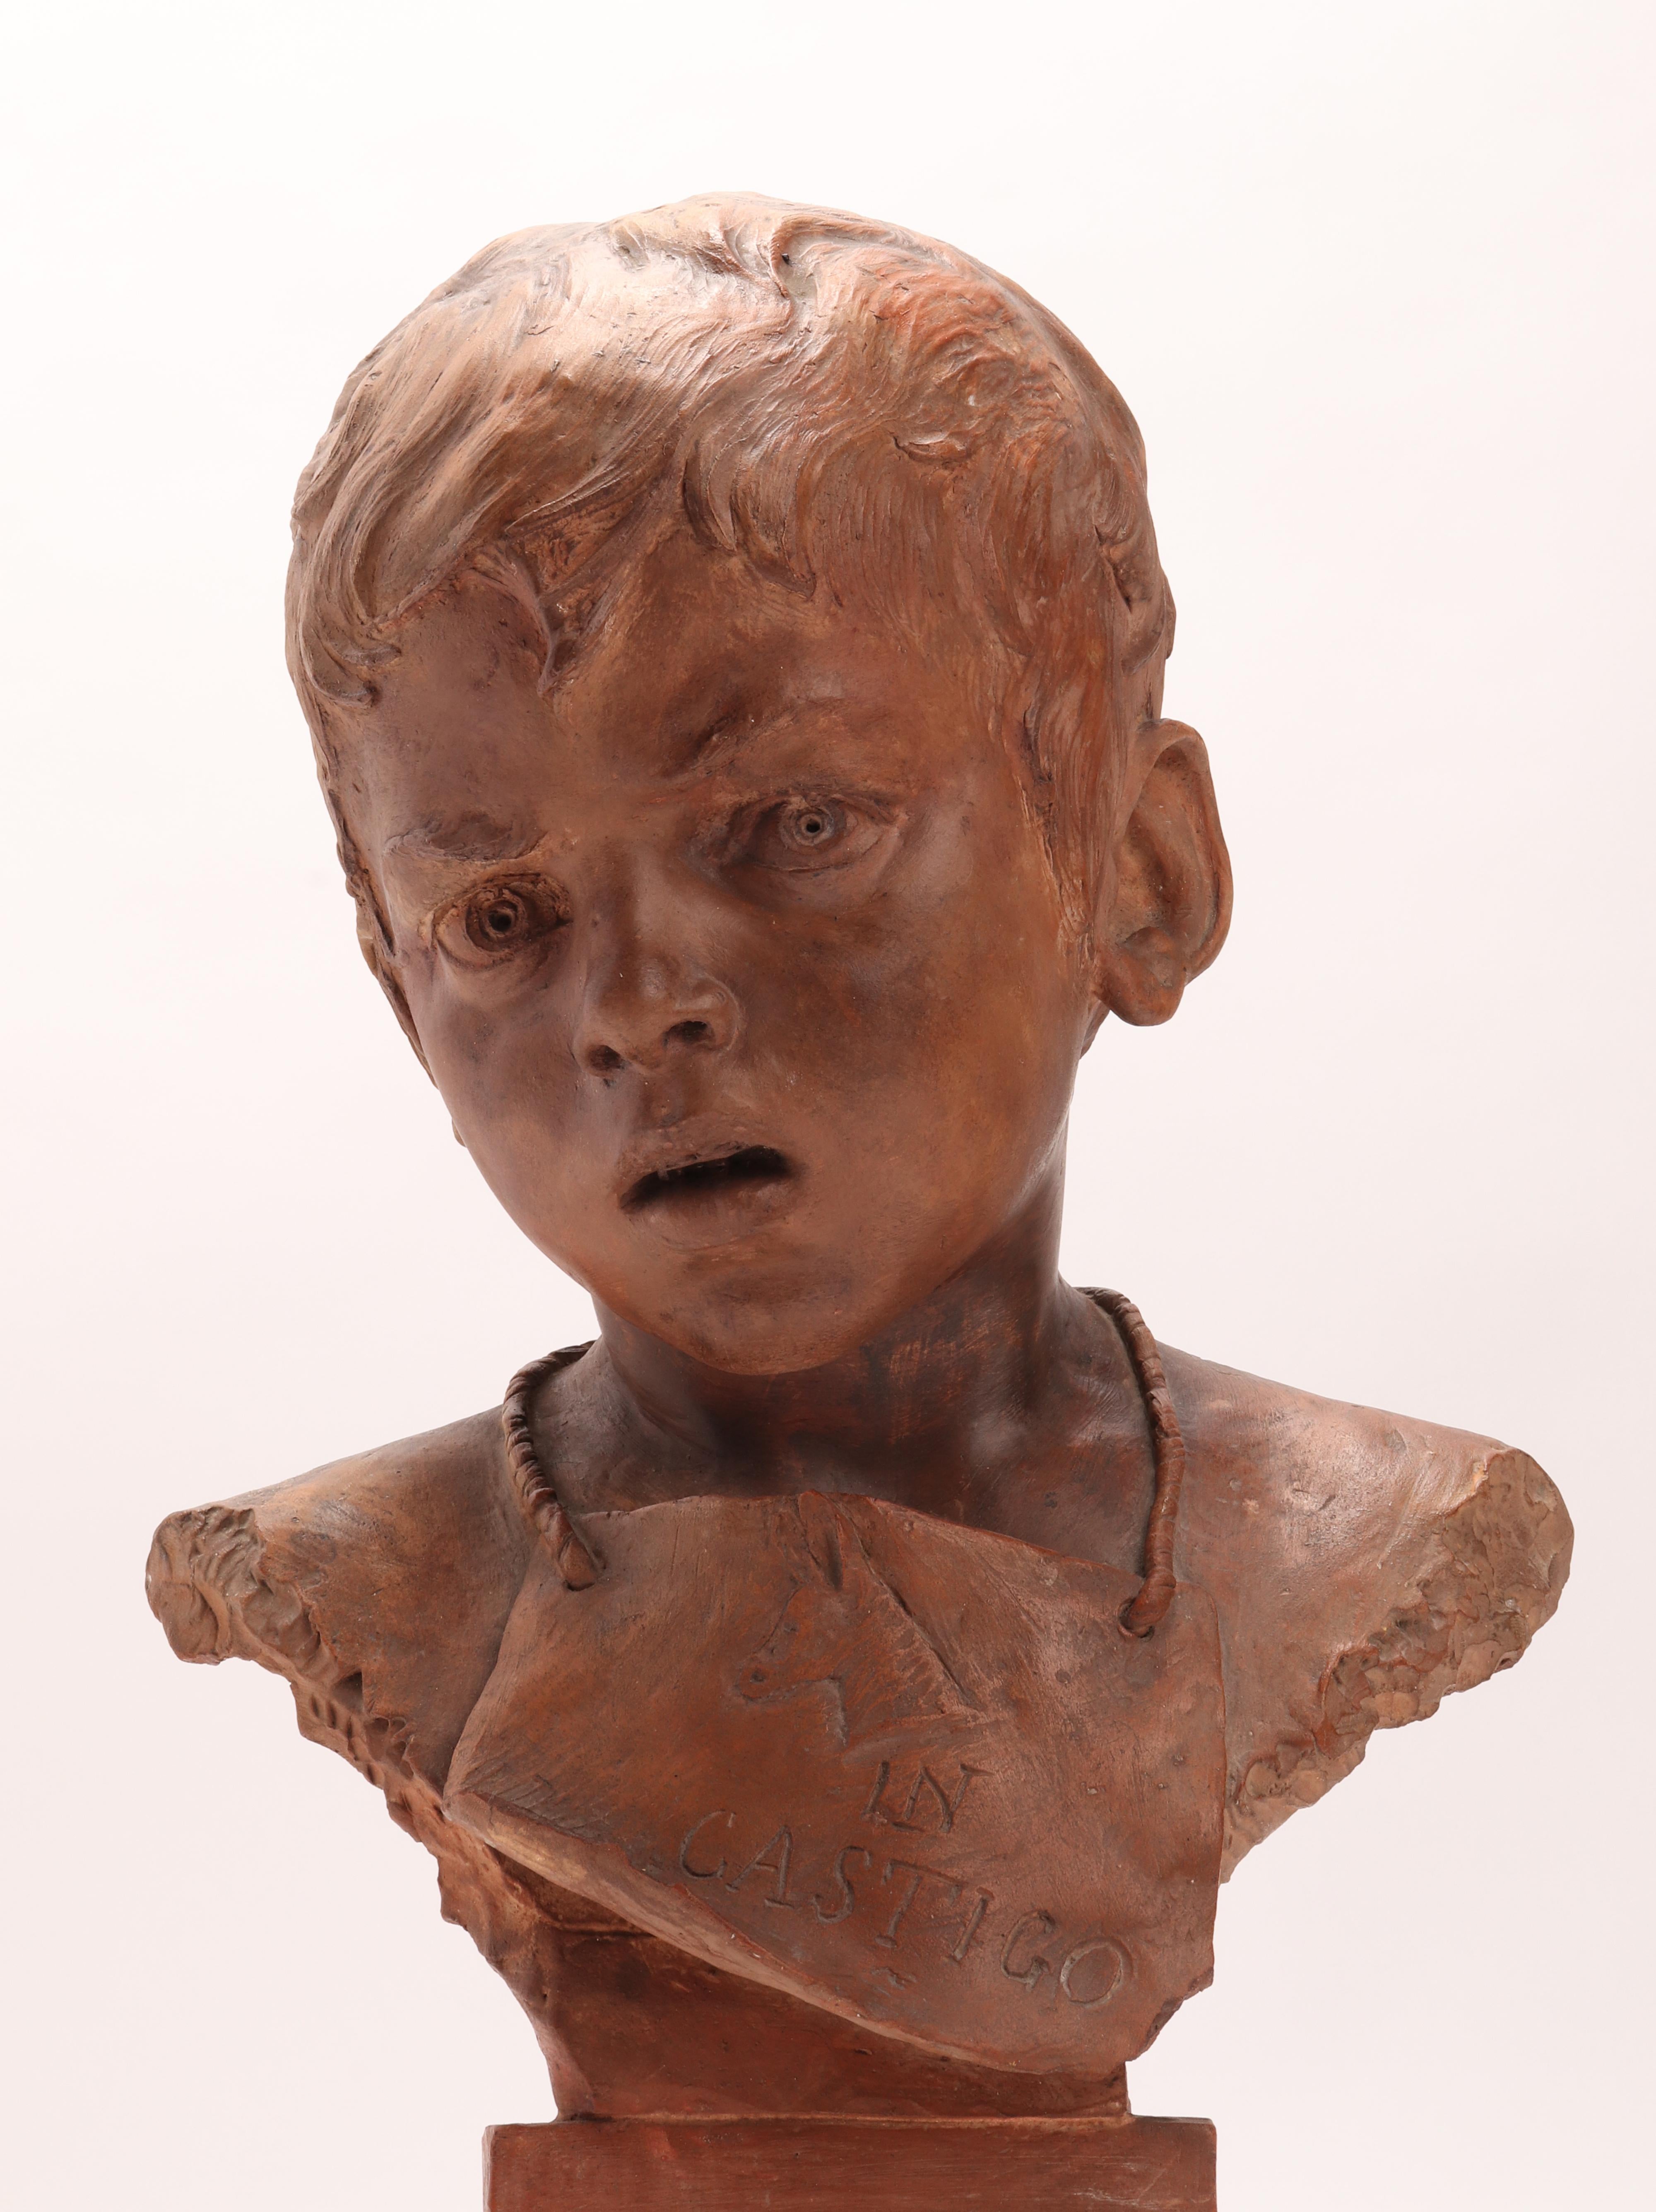 A handmade terracotta sculpture. It has a circular base with a wavy edge, then narrows to become a cylinder. On the base rests the bust of the child wearing an apron held around his neck by a lace. On the apron, a donkey's head is engraved in